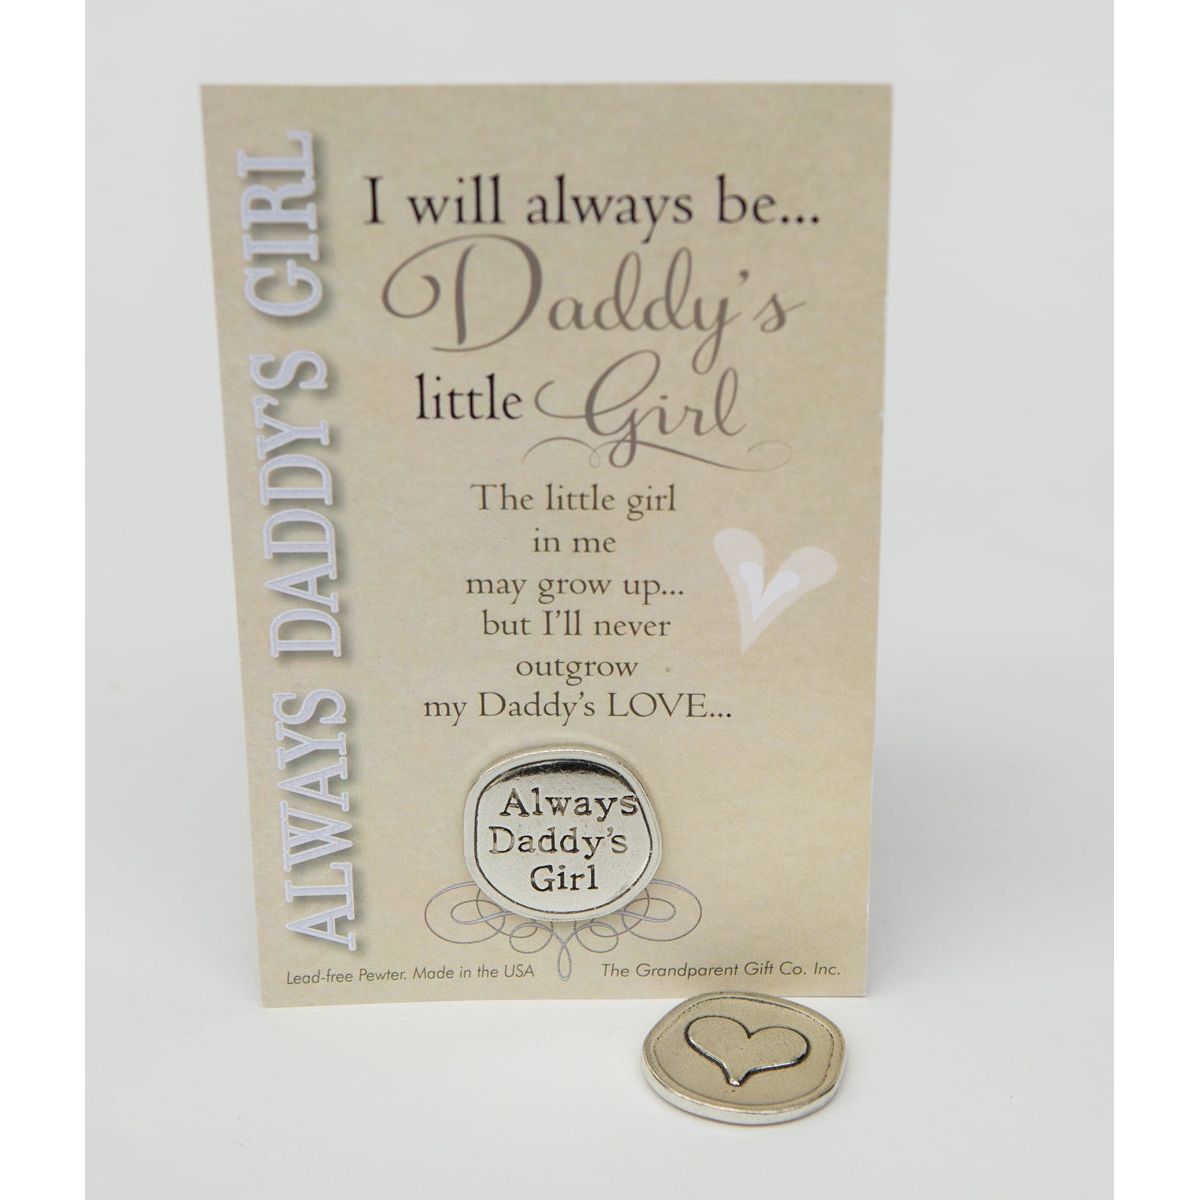 Gift for Dad frpm Daughter: Handmade pewter coin with "Always Daddy's Girl" on one side and a heart on the other, packaged in a clear bag with "I will always be...Daddy's little Girl" poem.